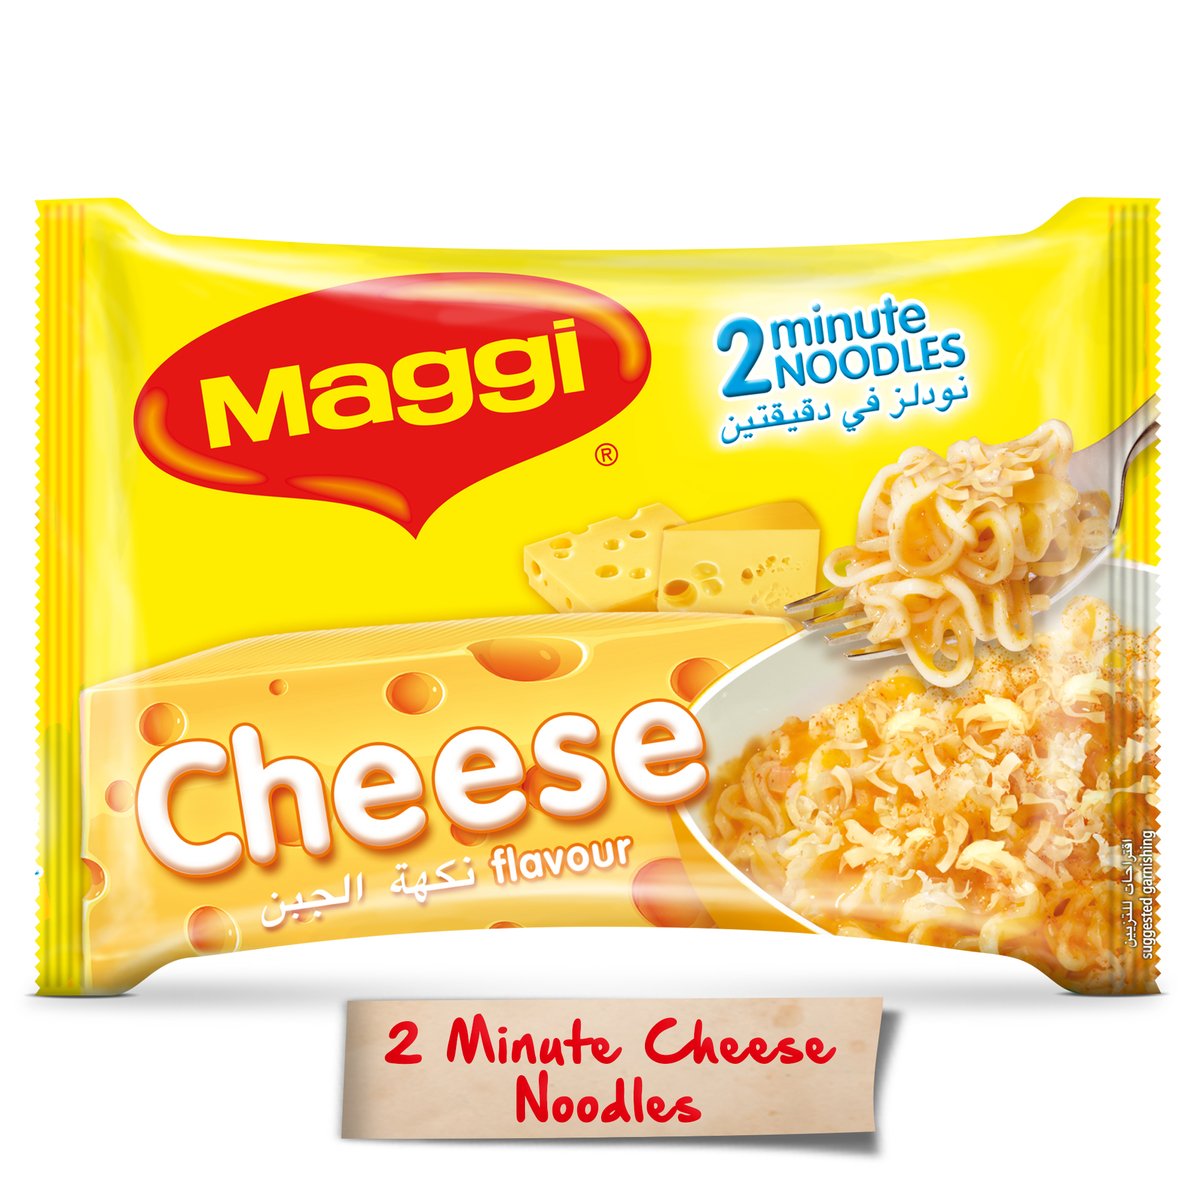 Maggi 2 Minute Noodles Cheese Flavour 77g x 5 Pieces